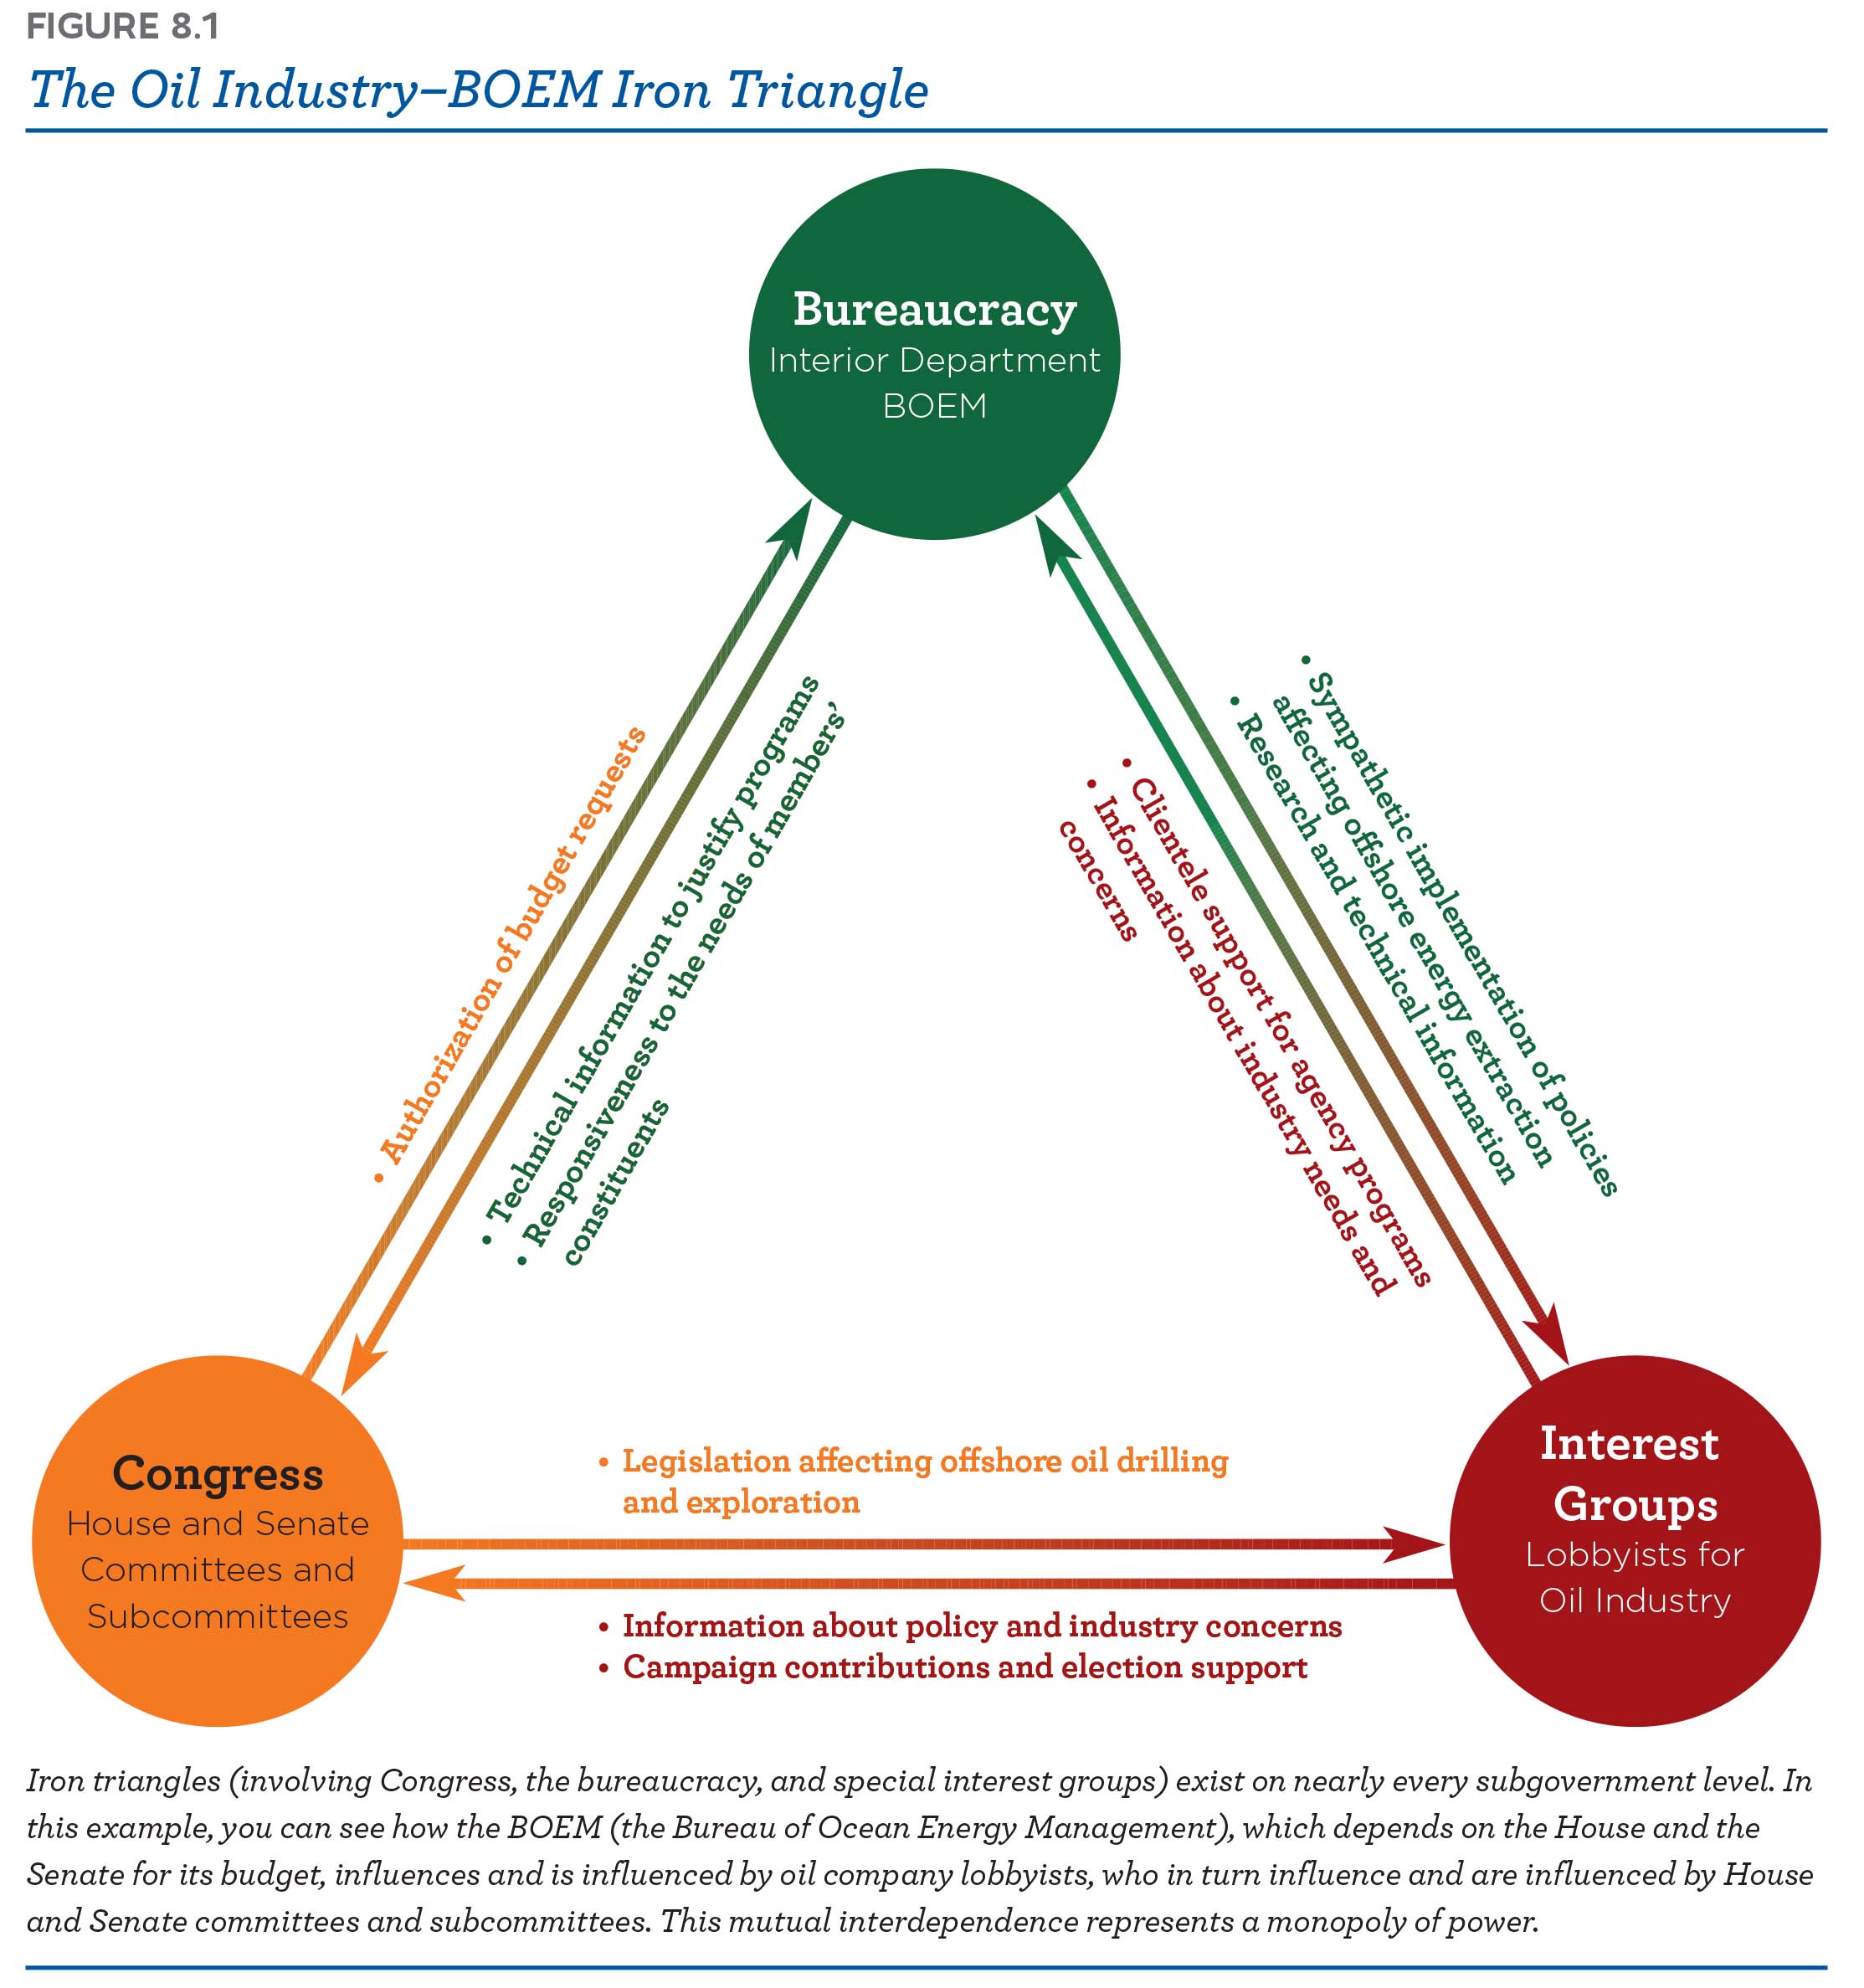 The Oil Industry: BOEM iron triangle